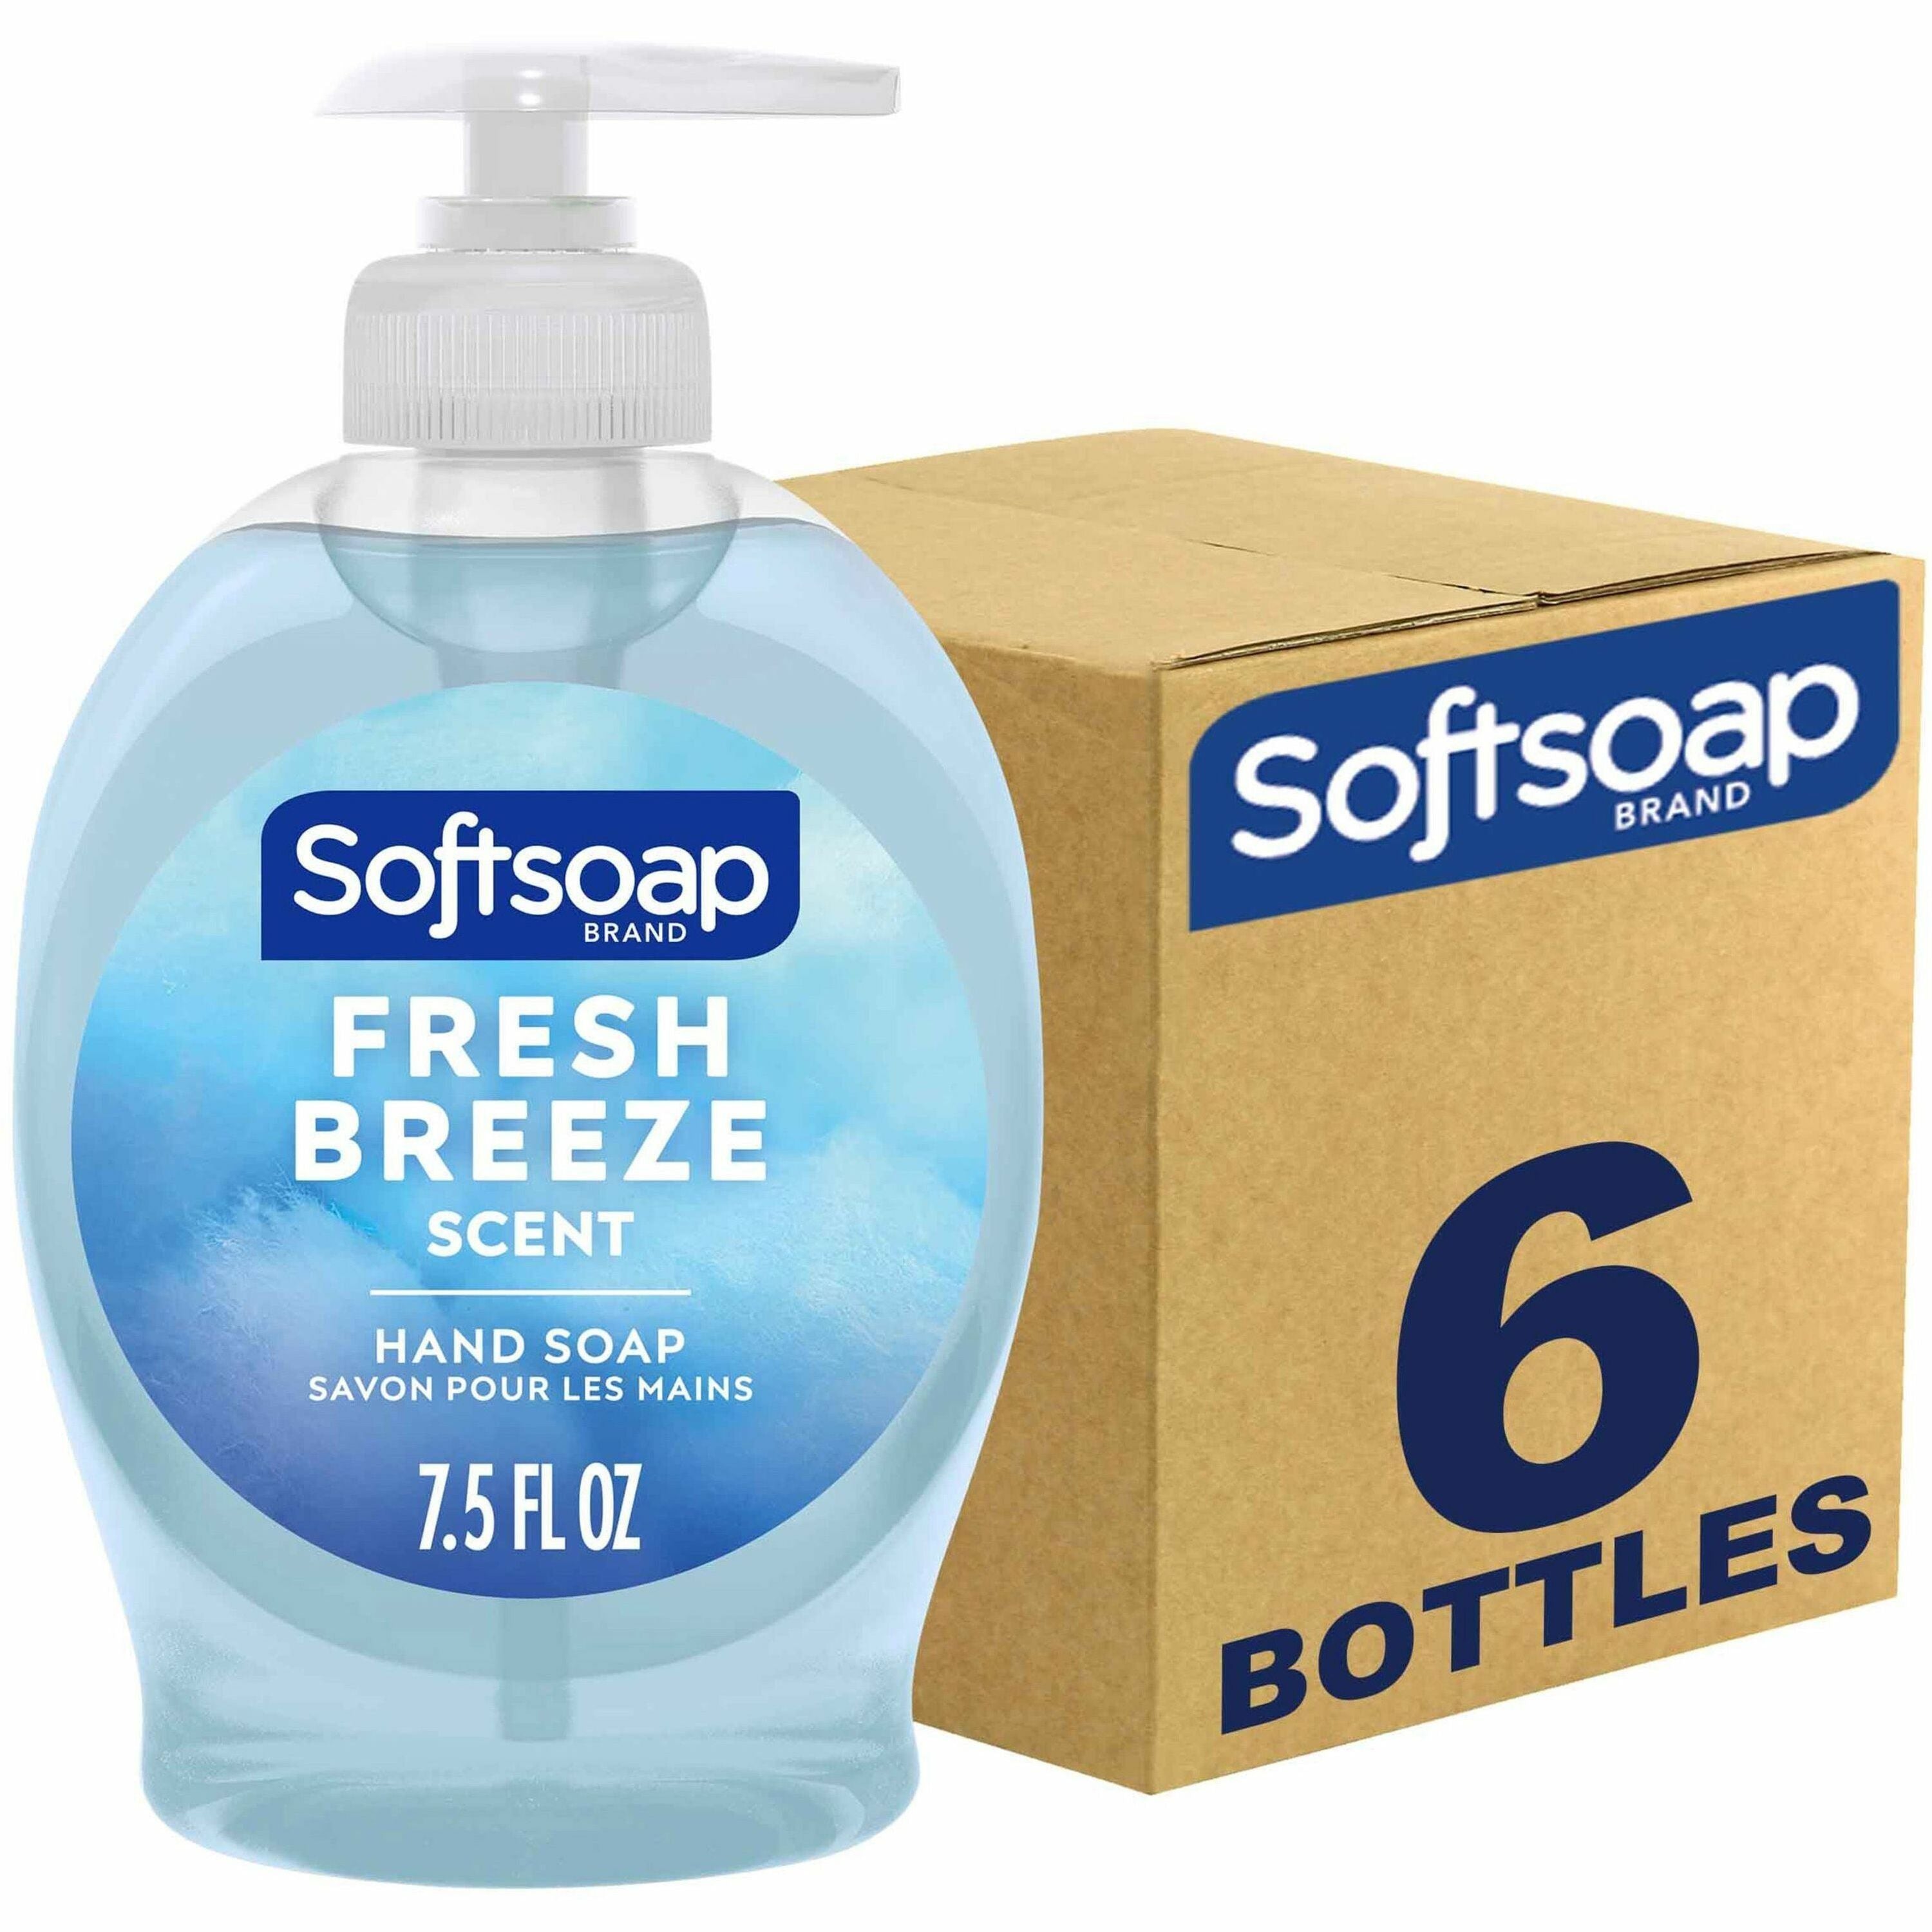 softsoap-fresh-breeze-hand-soap_cpcus04964act - 1